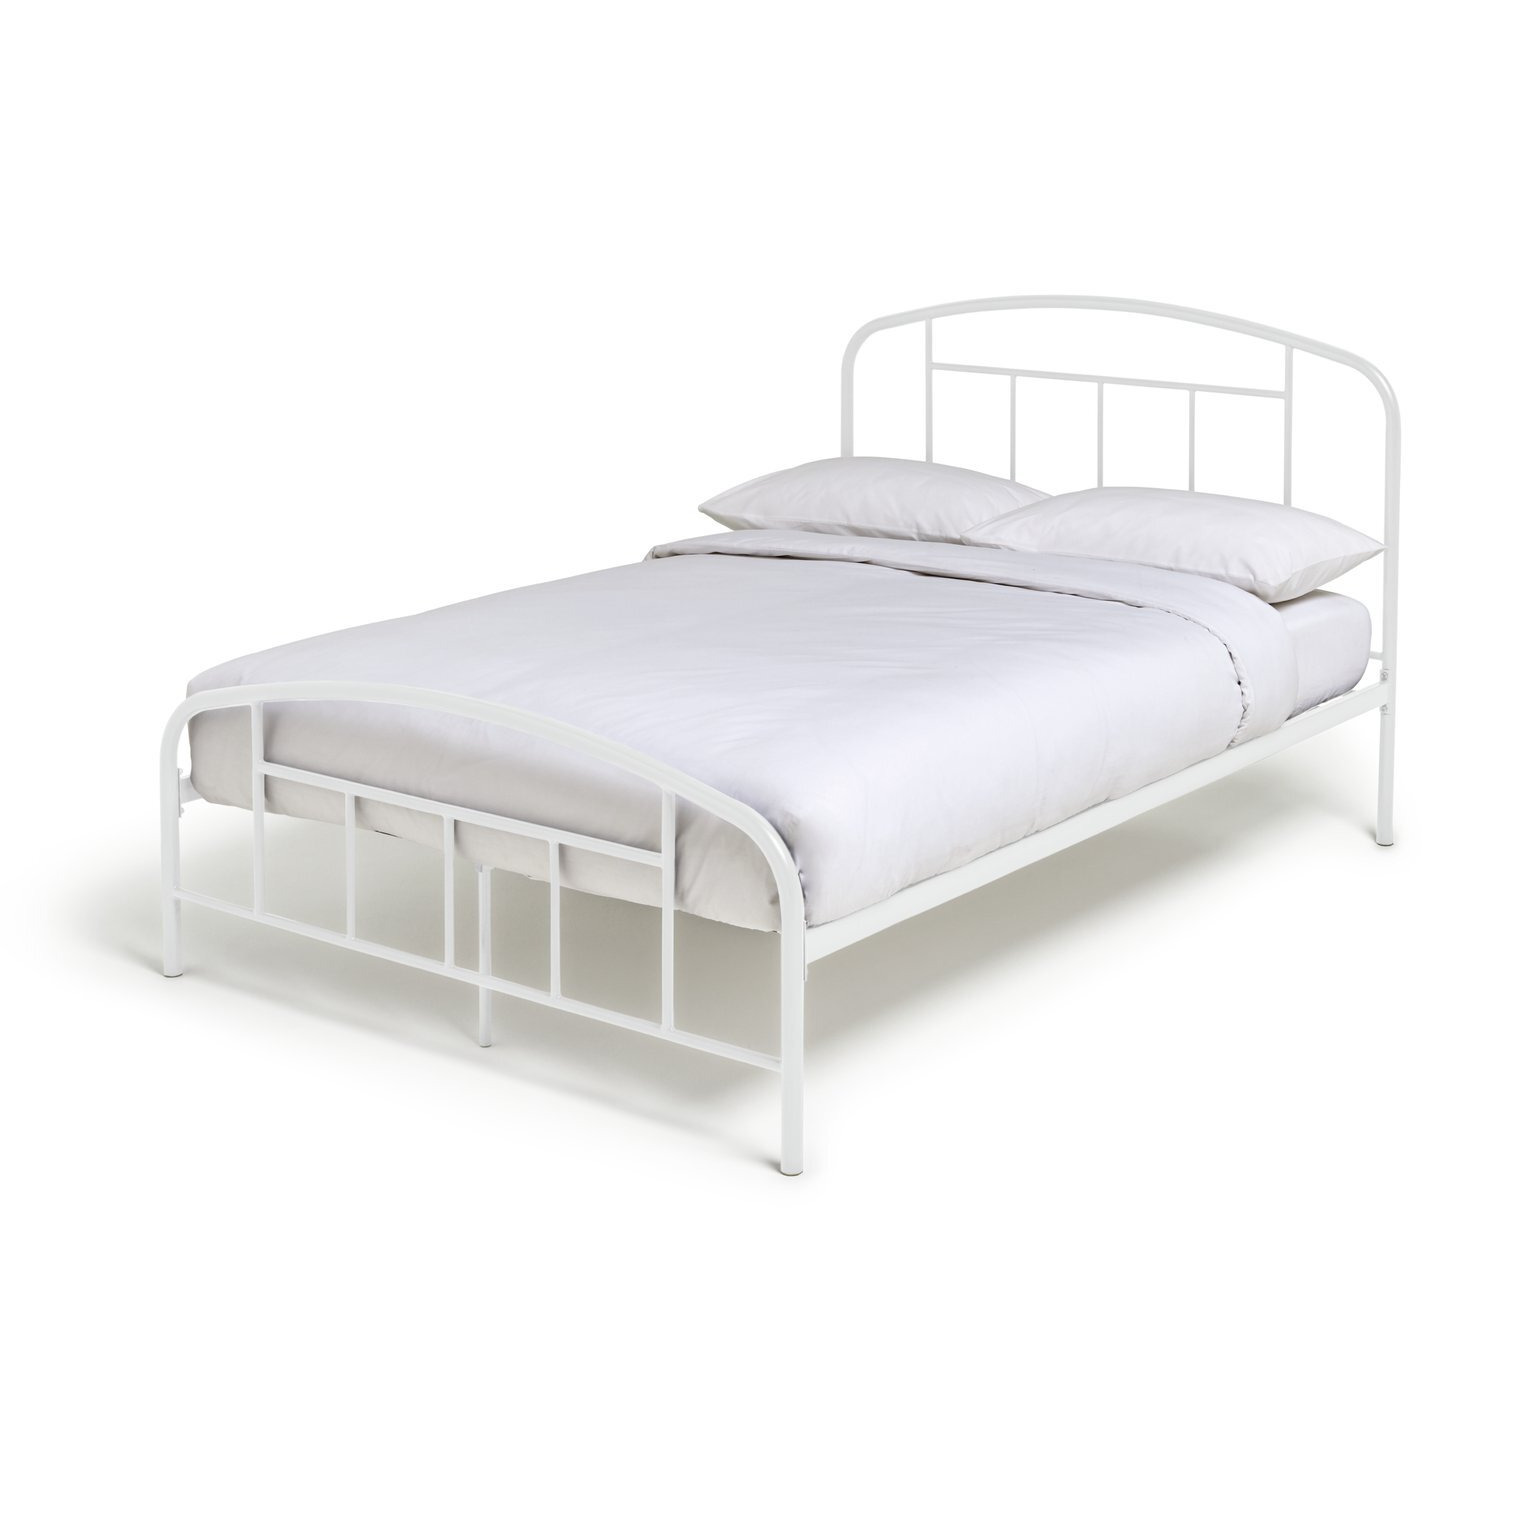 Habitat Pippa Small Double Metal Bed Frame - Off White - image 1